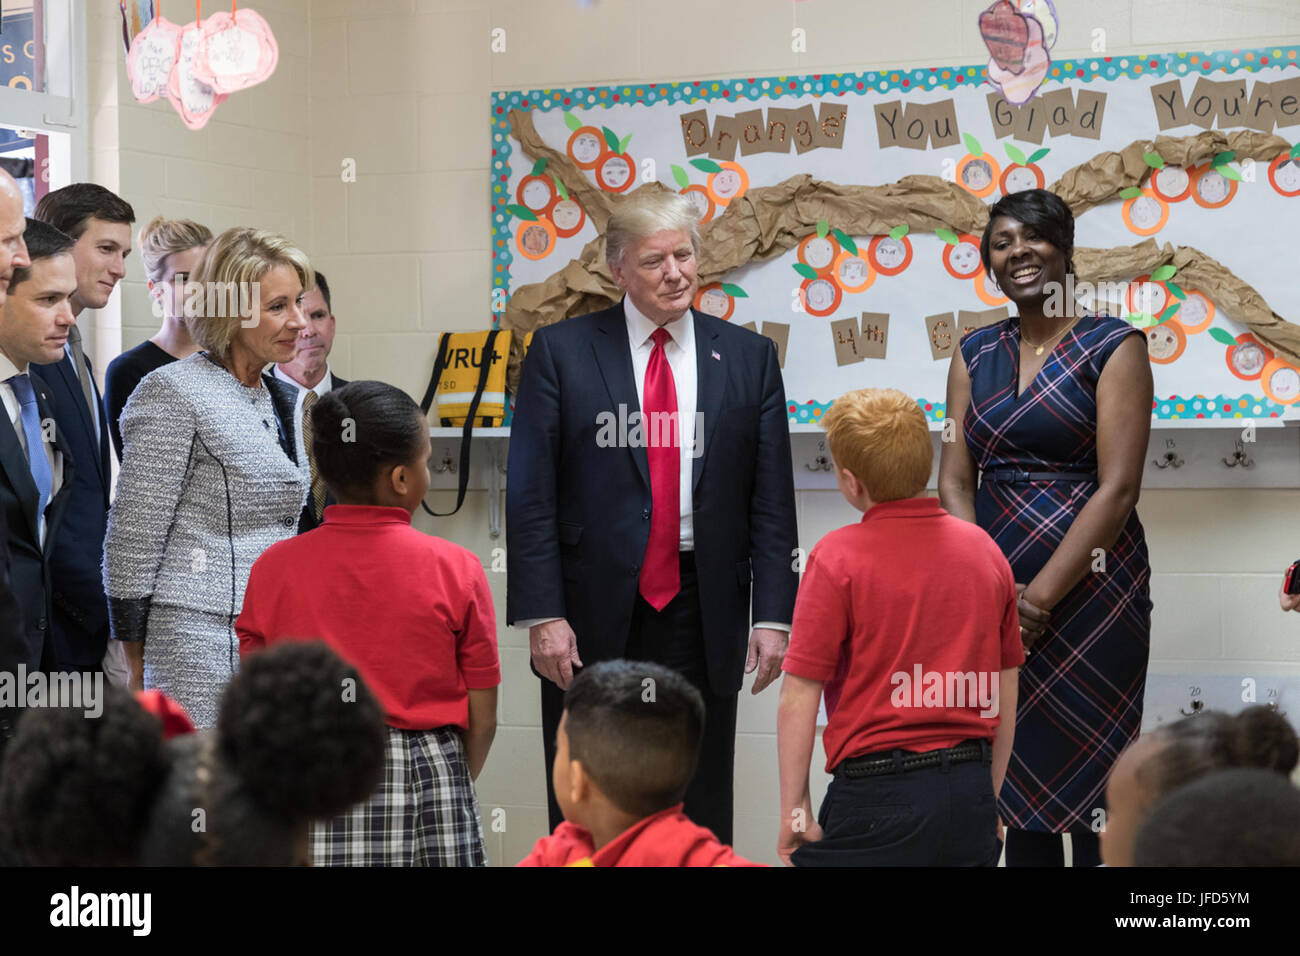 President Donald Trump and U.S. Secretary of Education Betsy DeVos participate in a tour of Saint Andrew's Catholic School on Friday, March 3, 2017, Orlando, Florida. (Official White House Photo by Shealah Craighead) Stock Photo